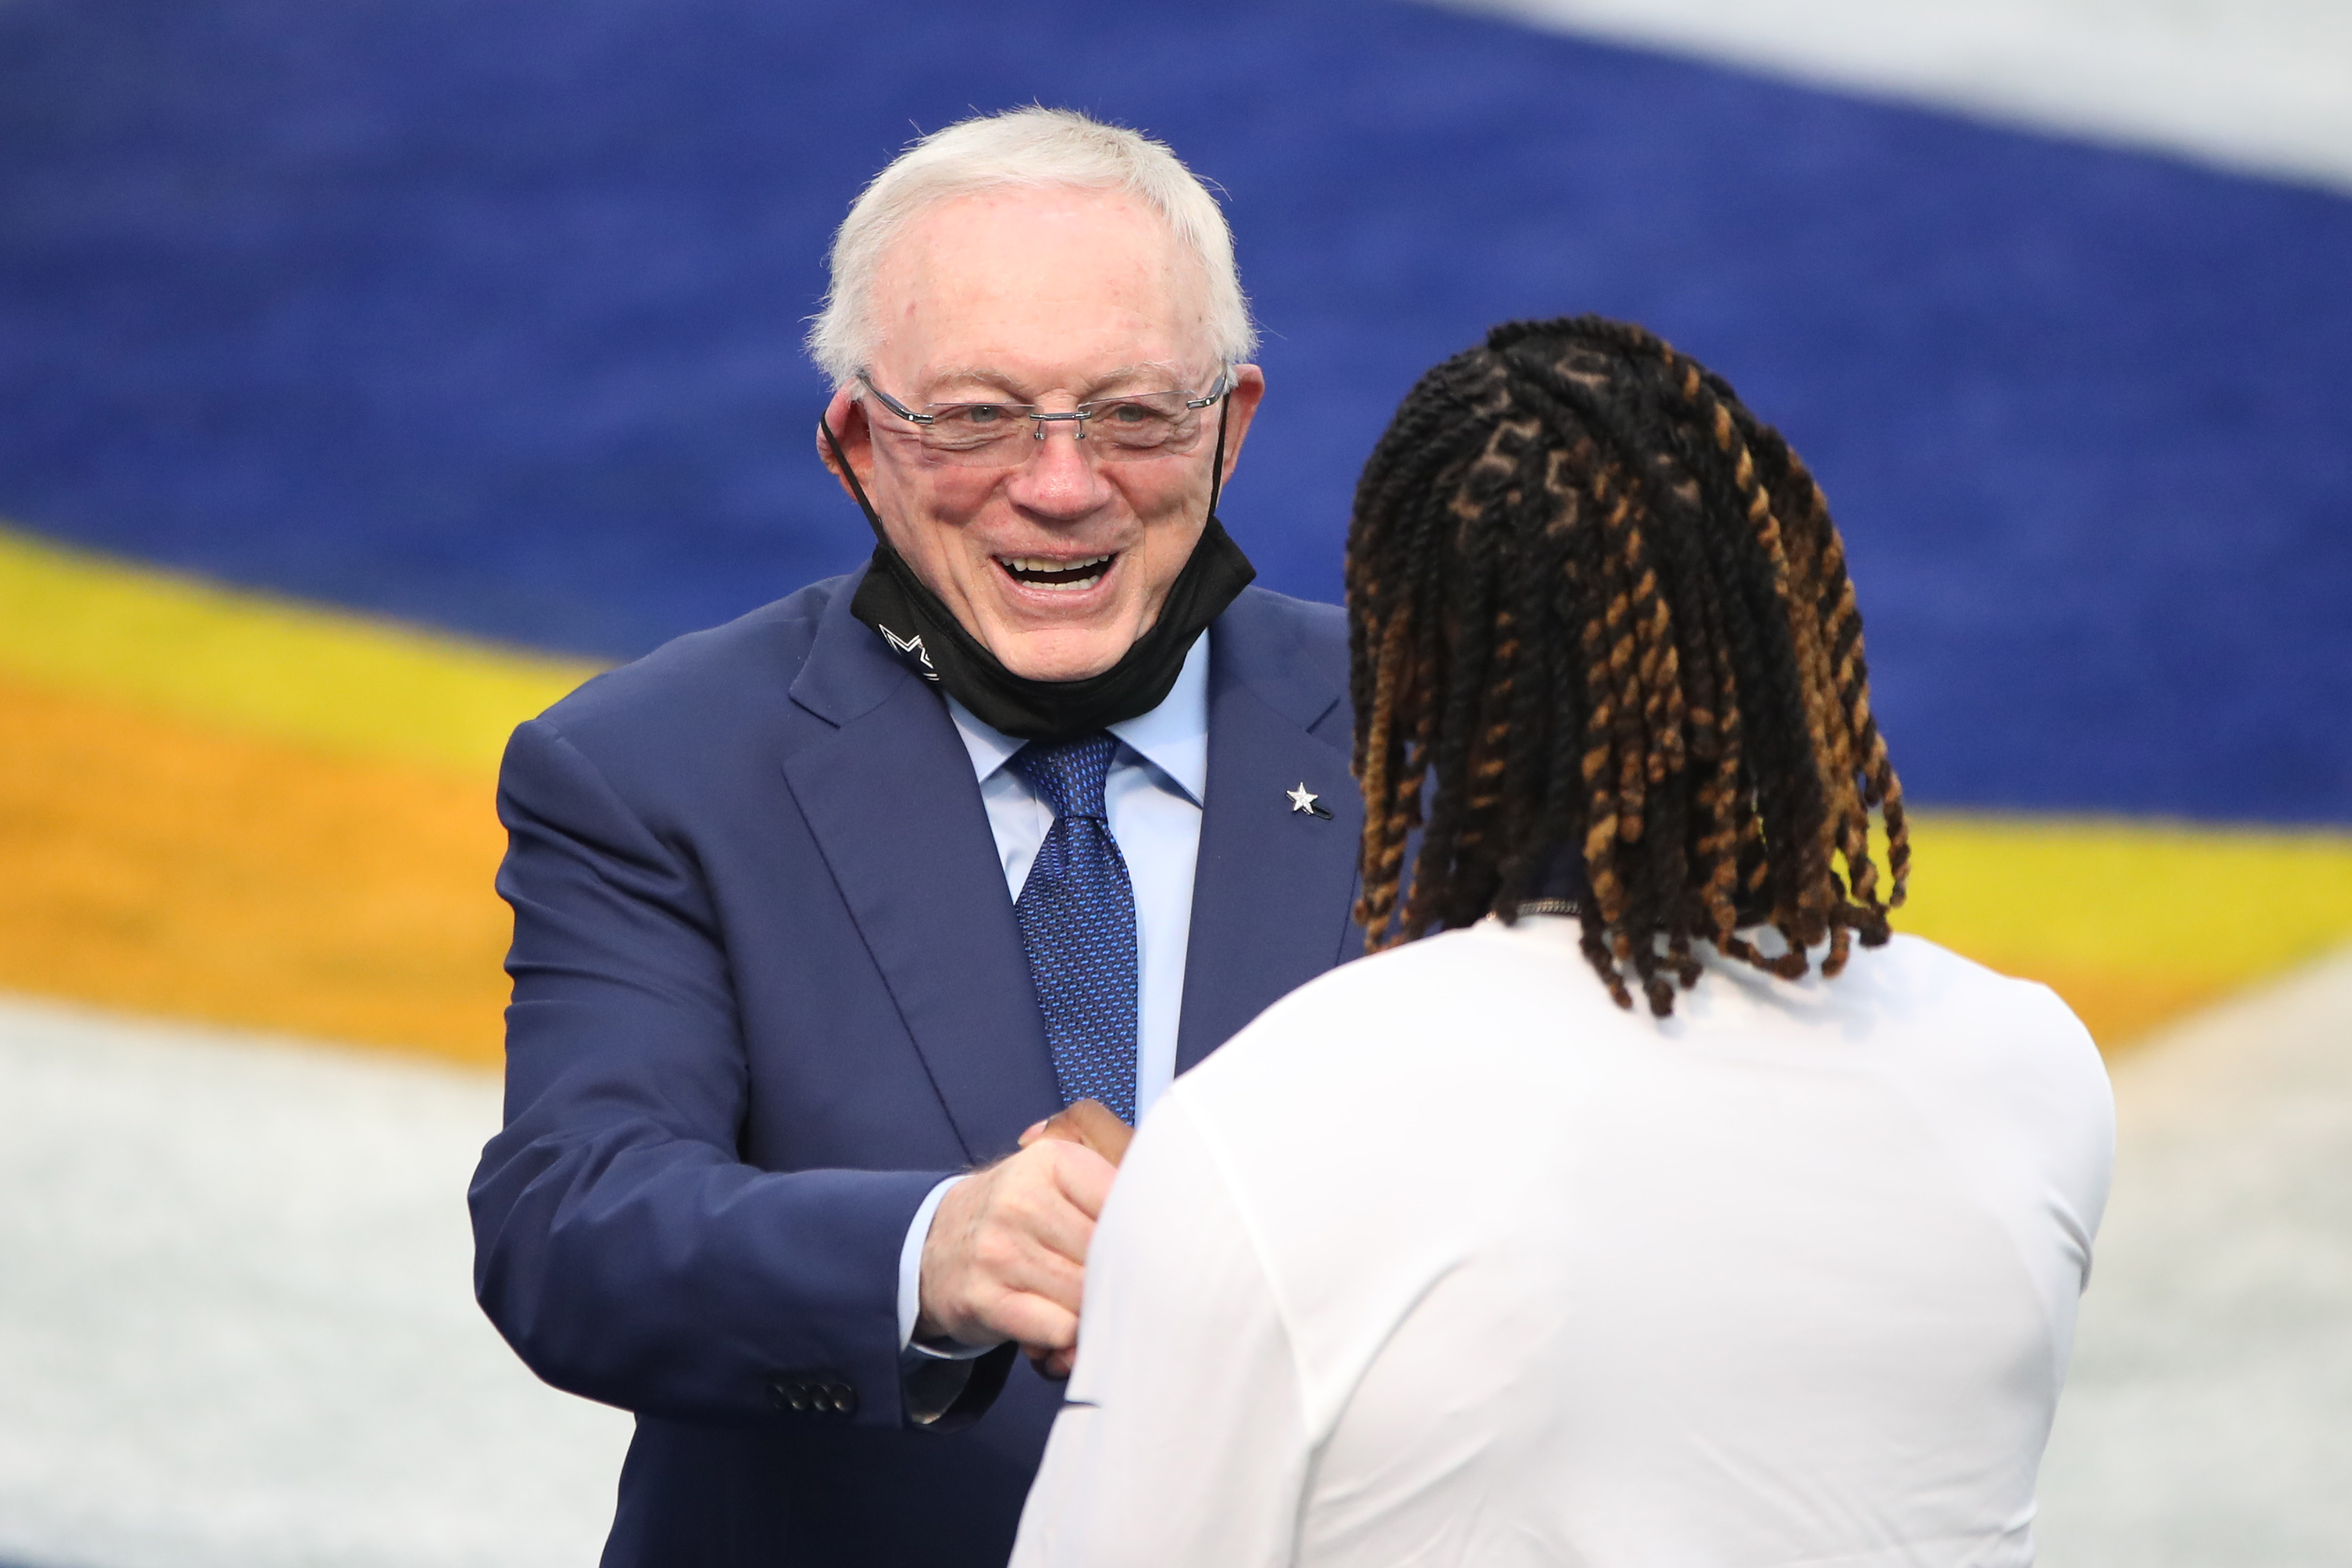 Dallas Cowboys owner Jerry Jones talks with CeeDee Lamb before a game